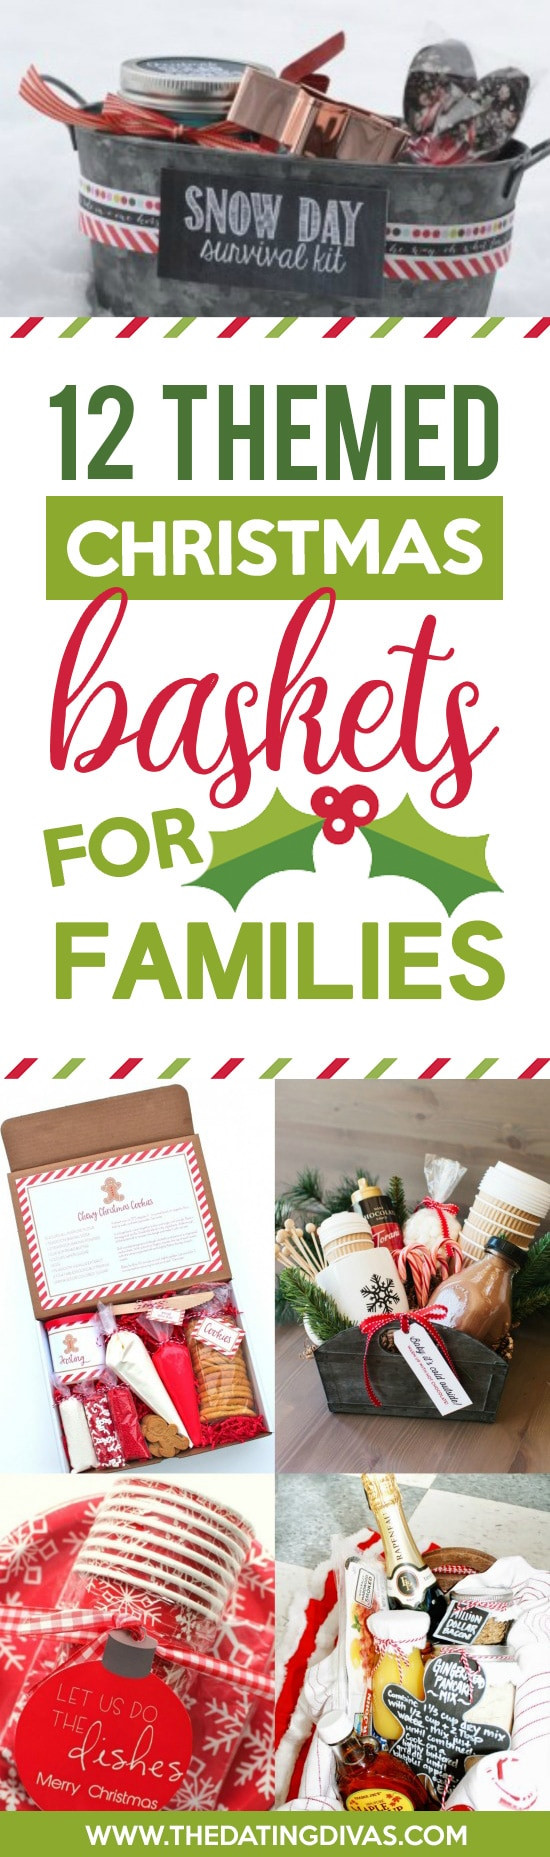 Holiday Gift Ideas Family
 50 Themed Christmas Basket Ideas The Dating Divas